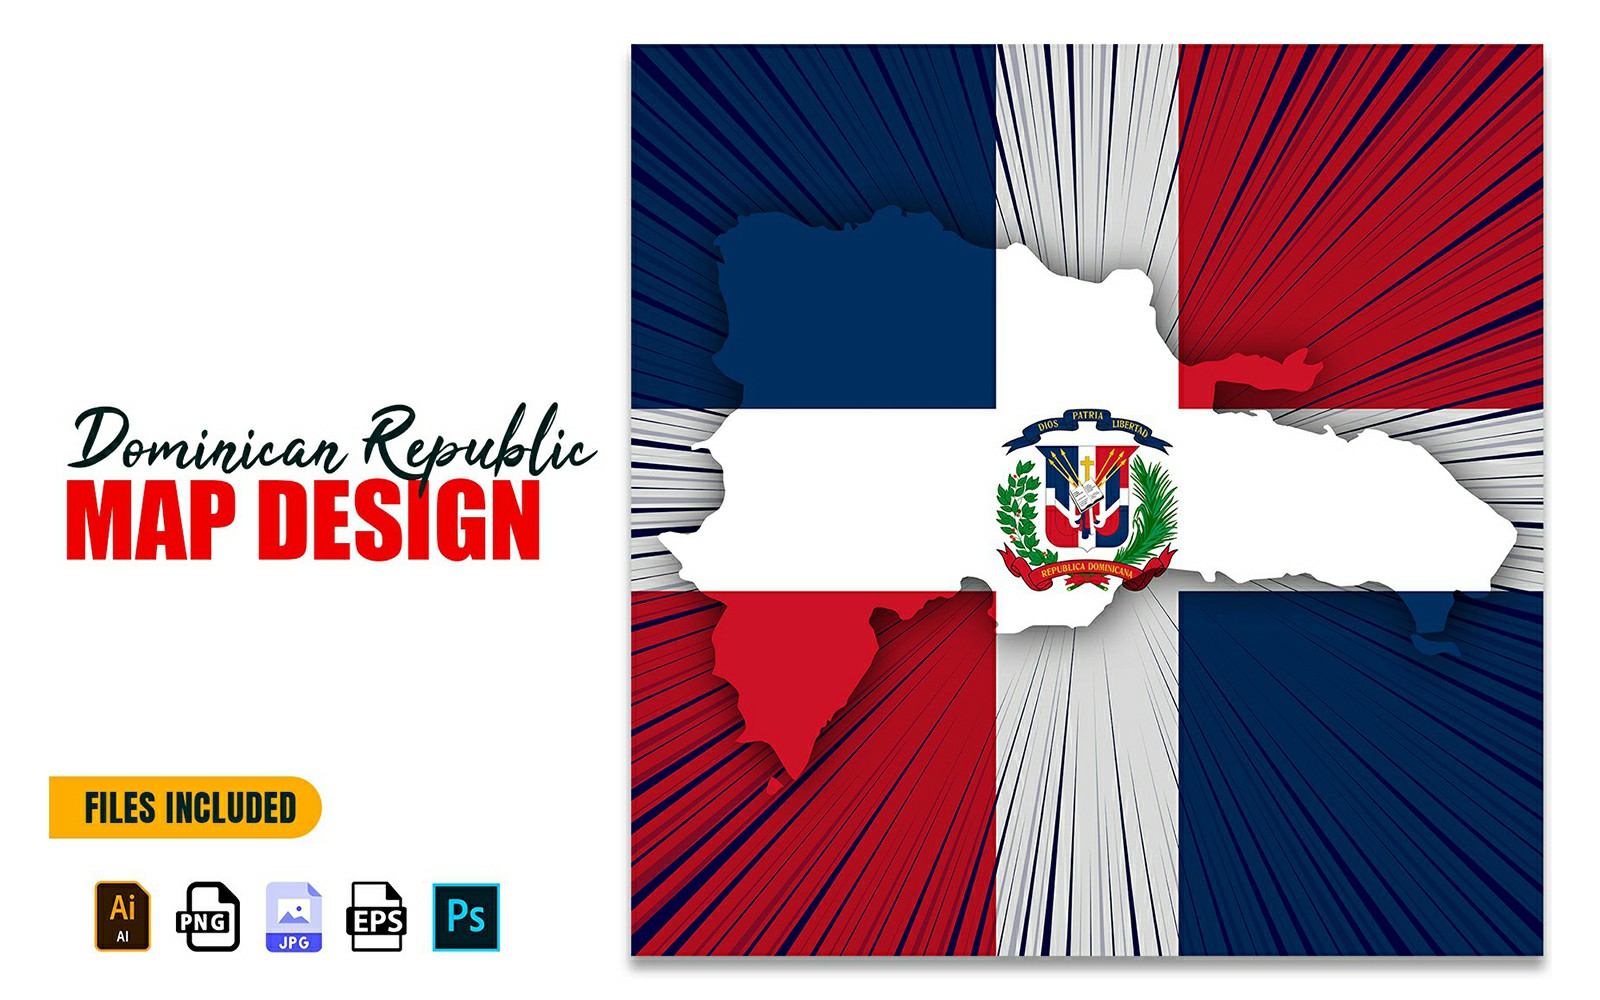 Dominican Republic National Day Map Design Illustration